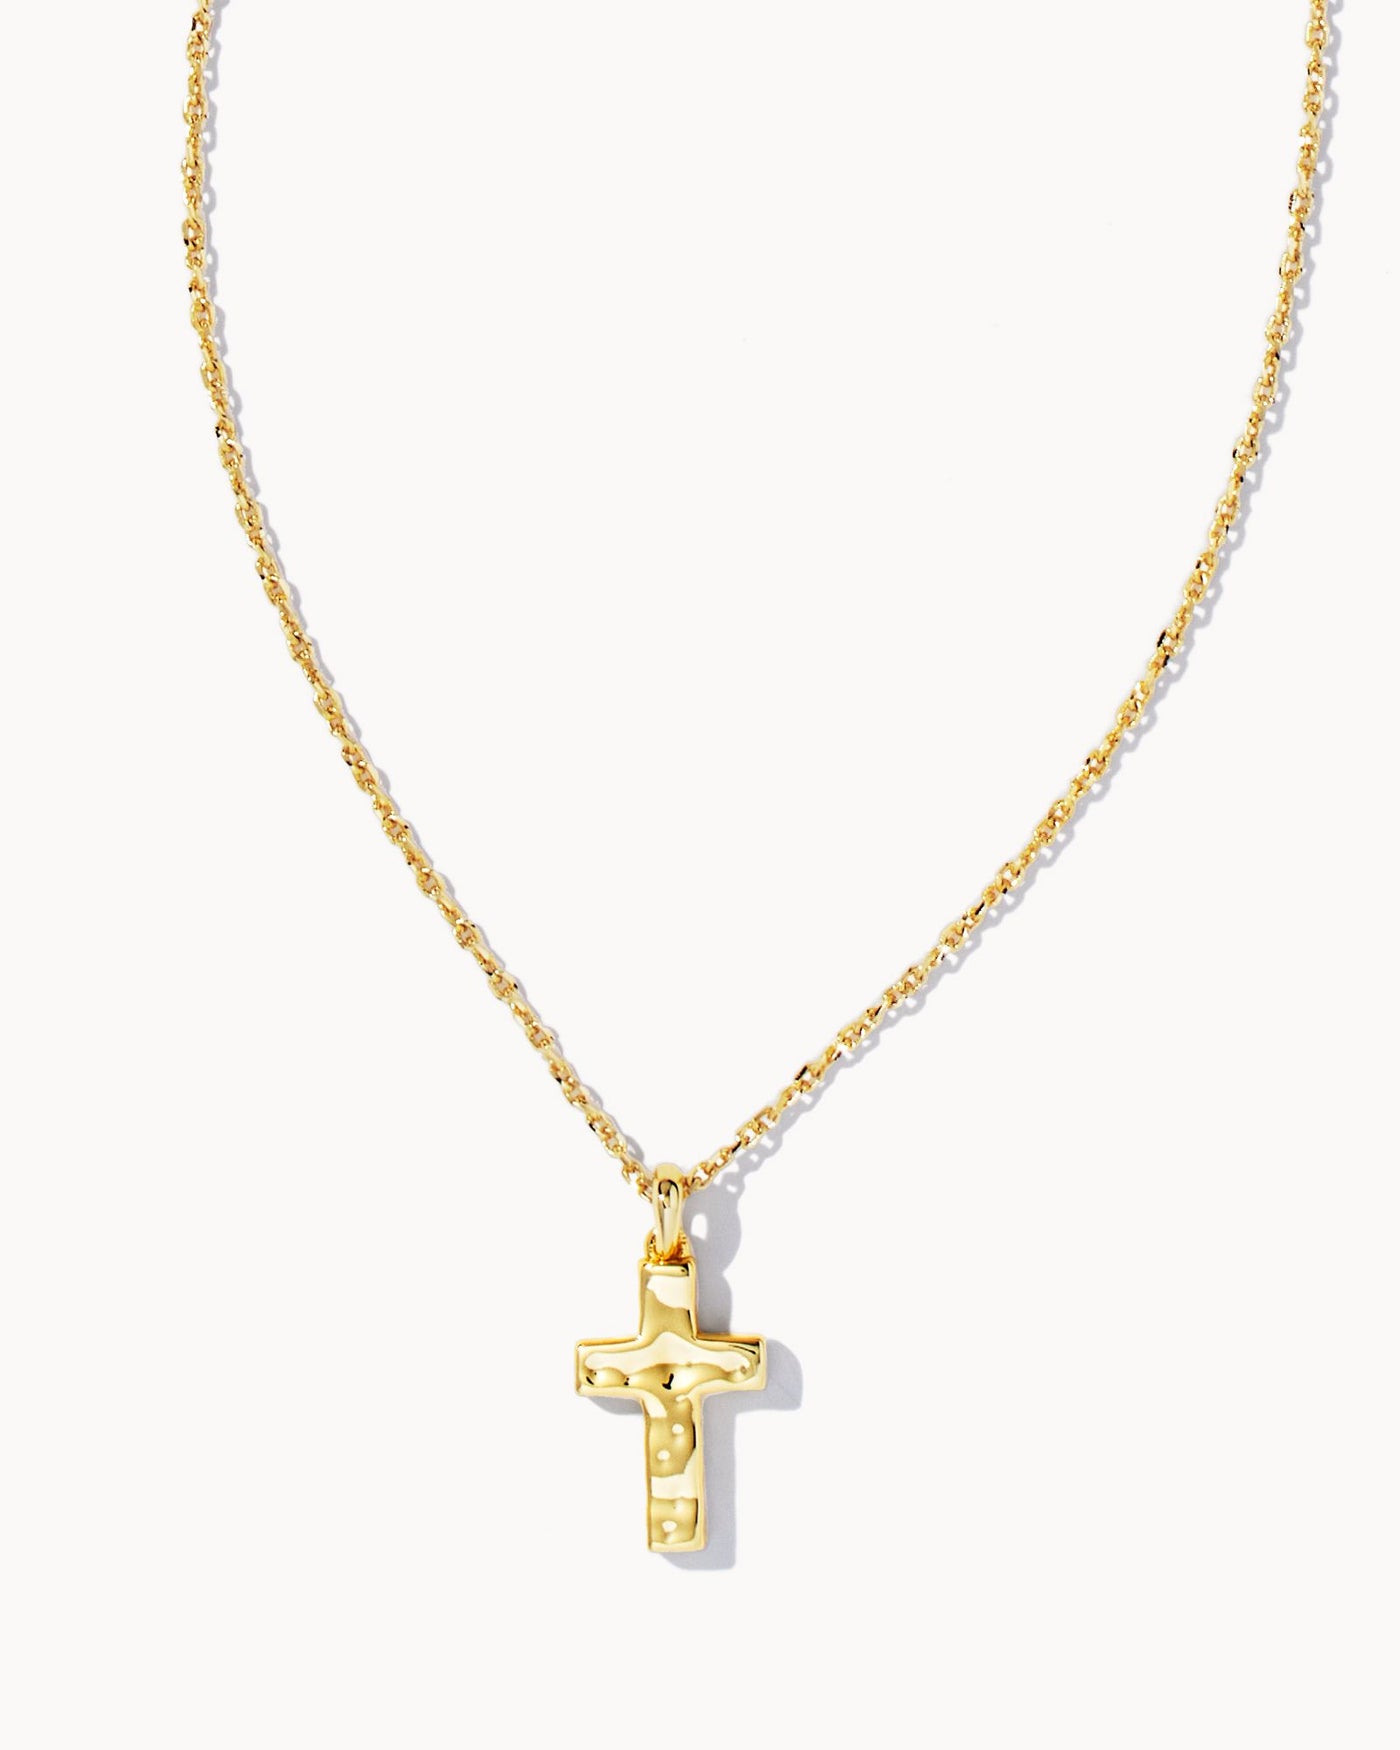 Kendra Scott Cross Pendant Necklace - Gold Metal-Necklaces-Kendra Scott-Market Street Nest, Fashionable Clothing, Shoes and Home Décor Located in Mabank, TX